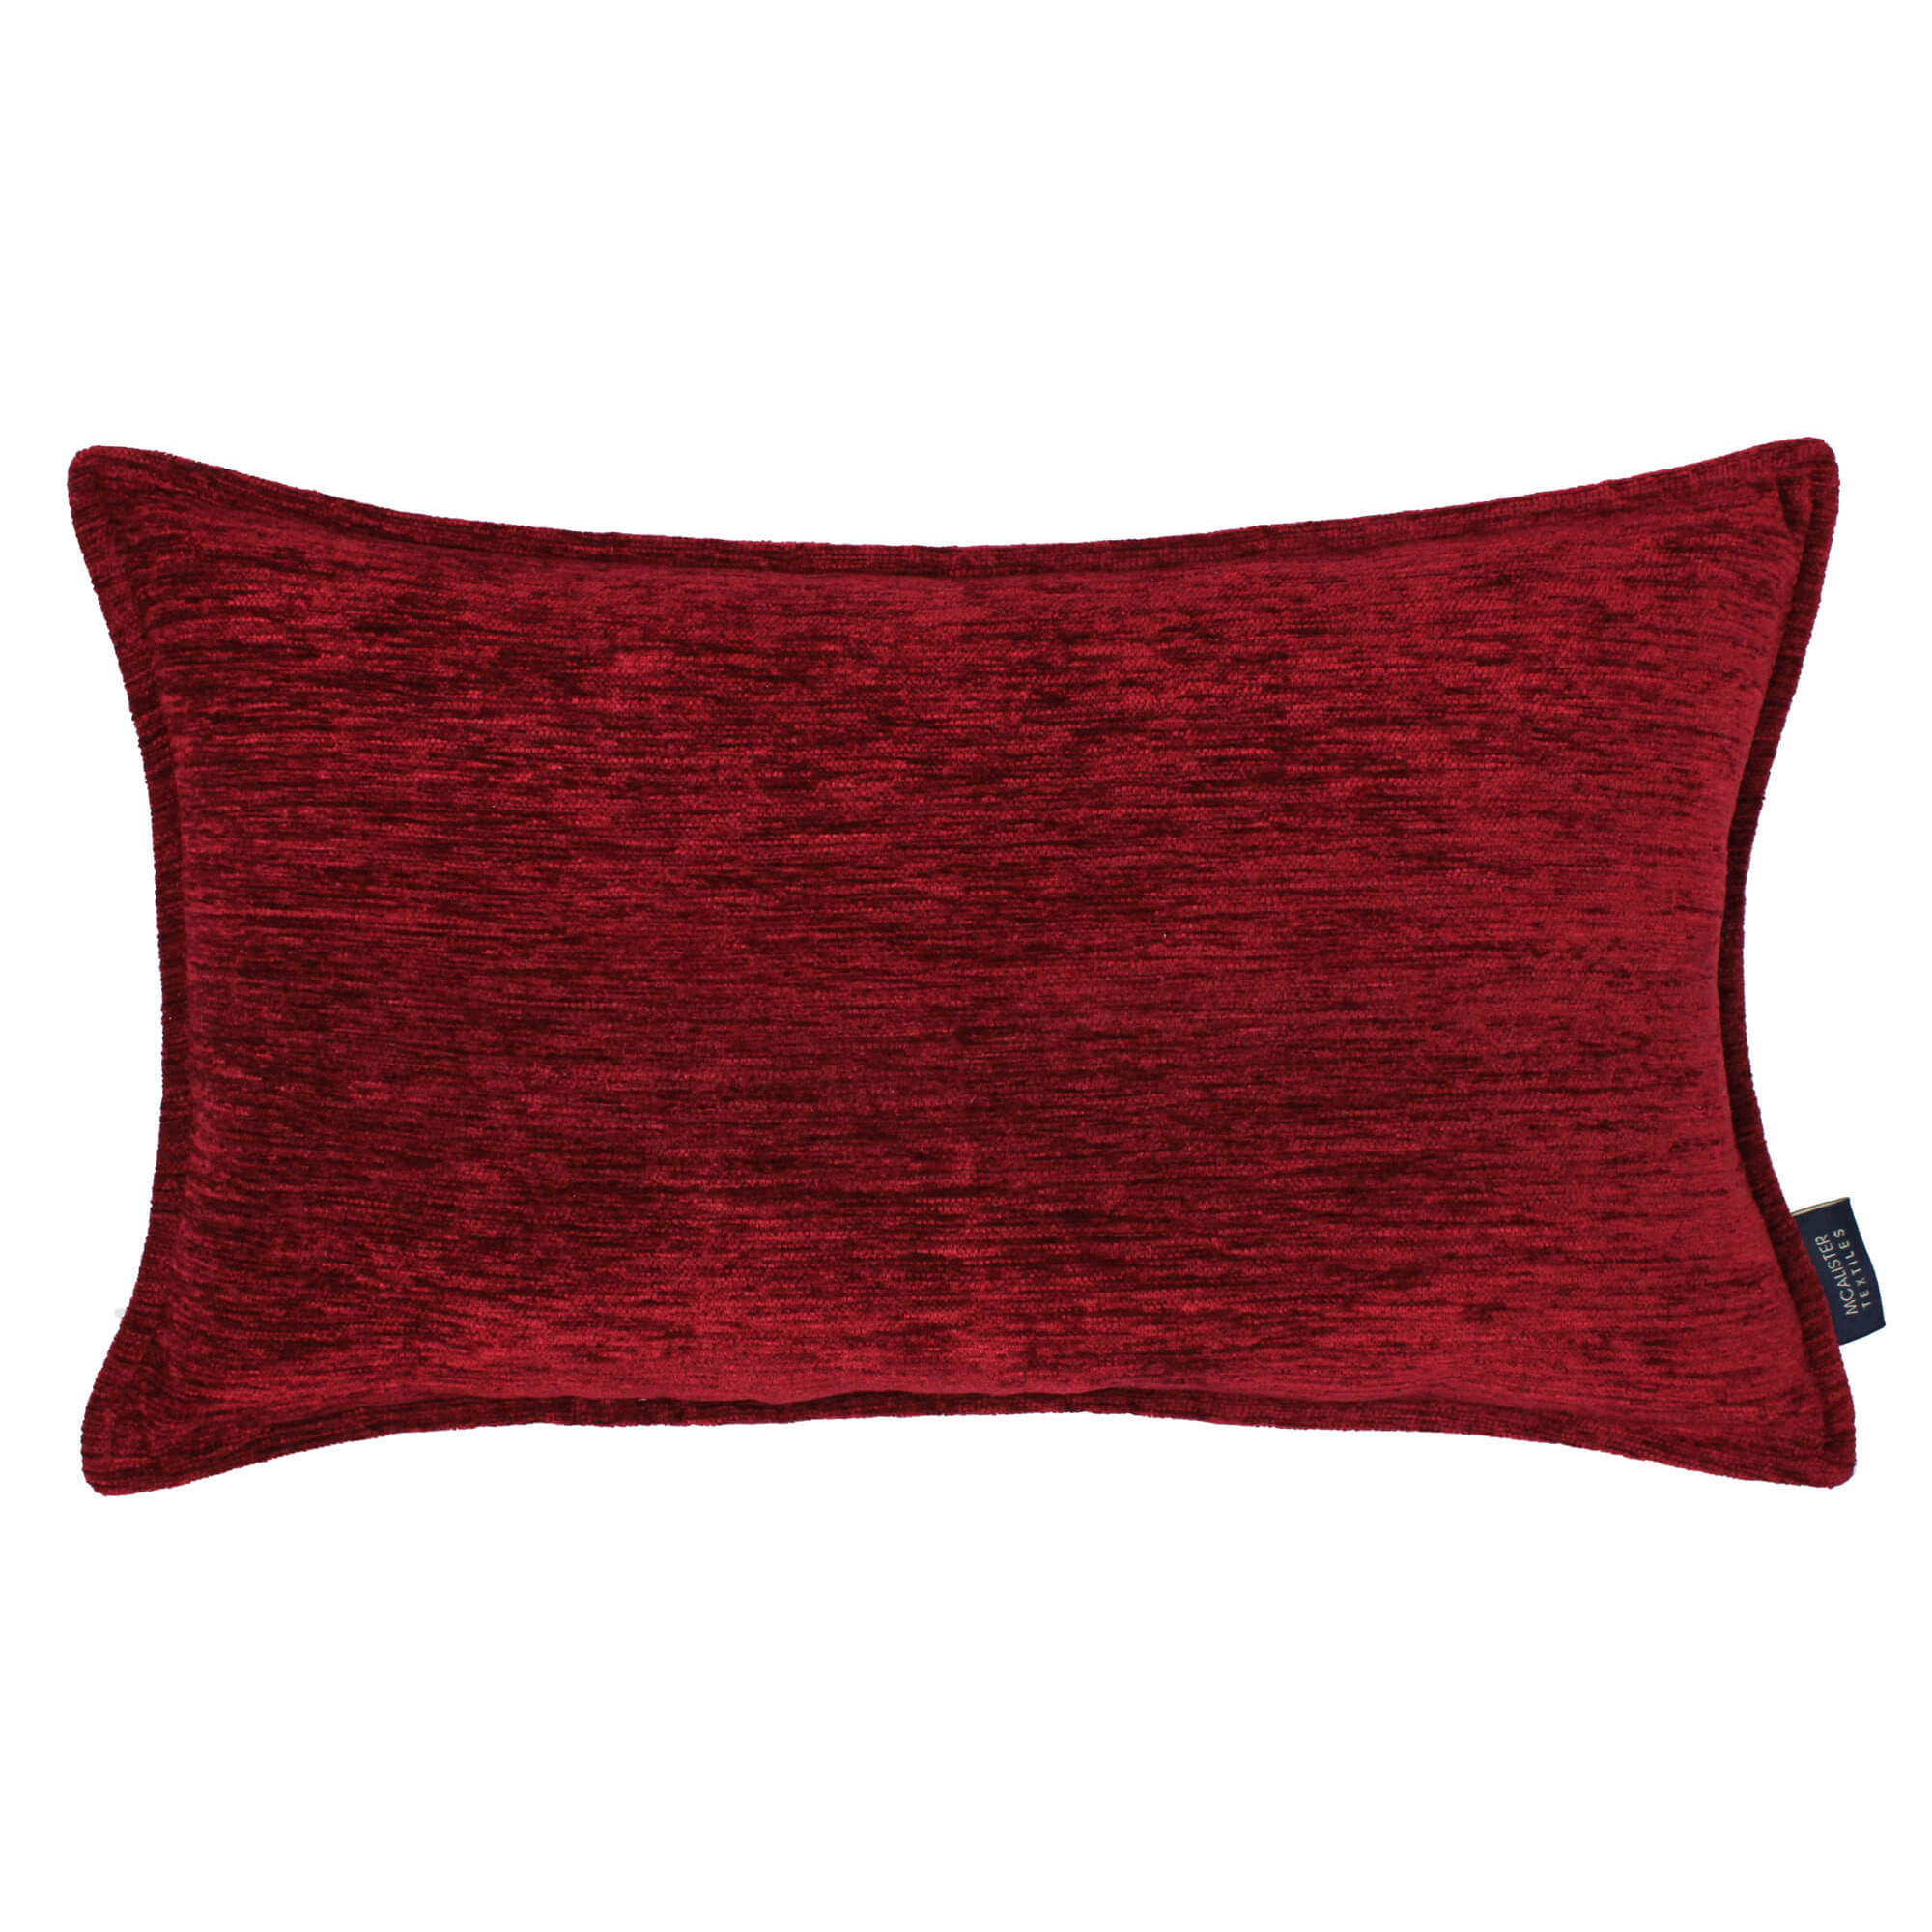 Plain Chenille Red Pillow, Cover Only / 50cm x 30cm